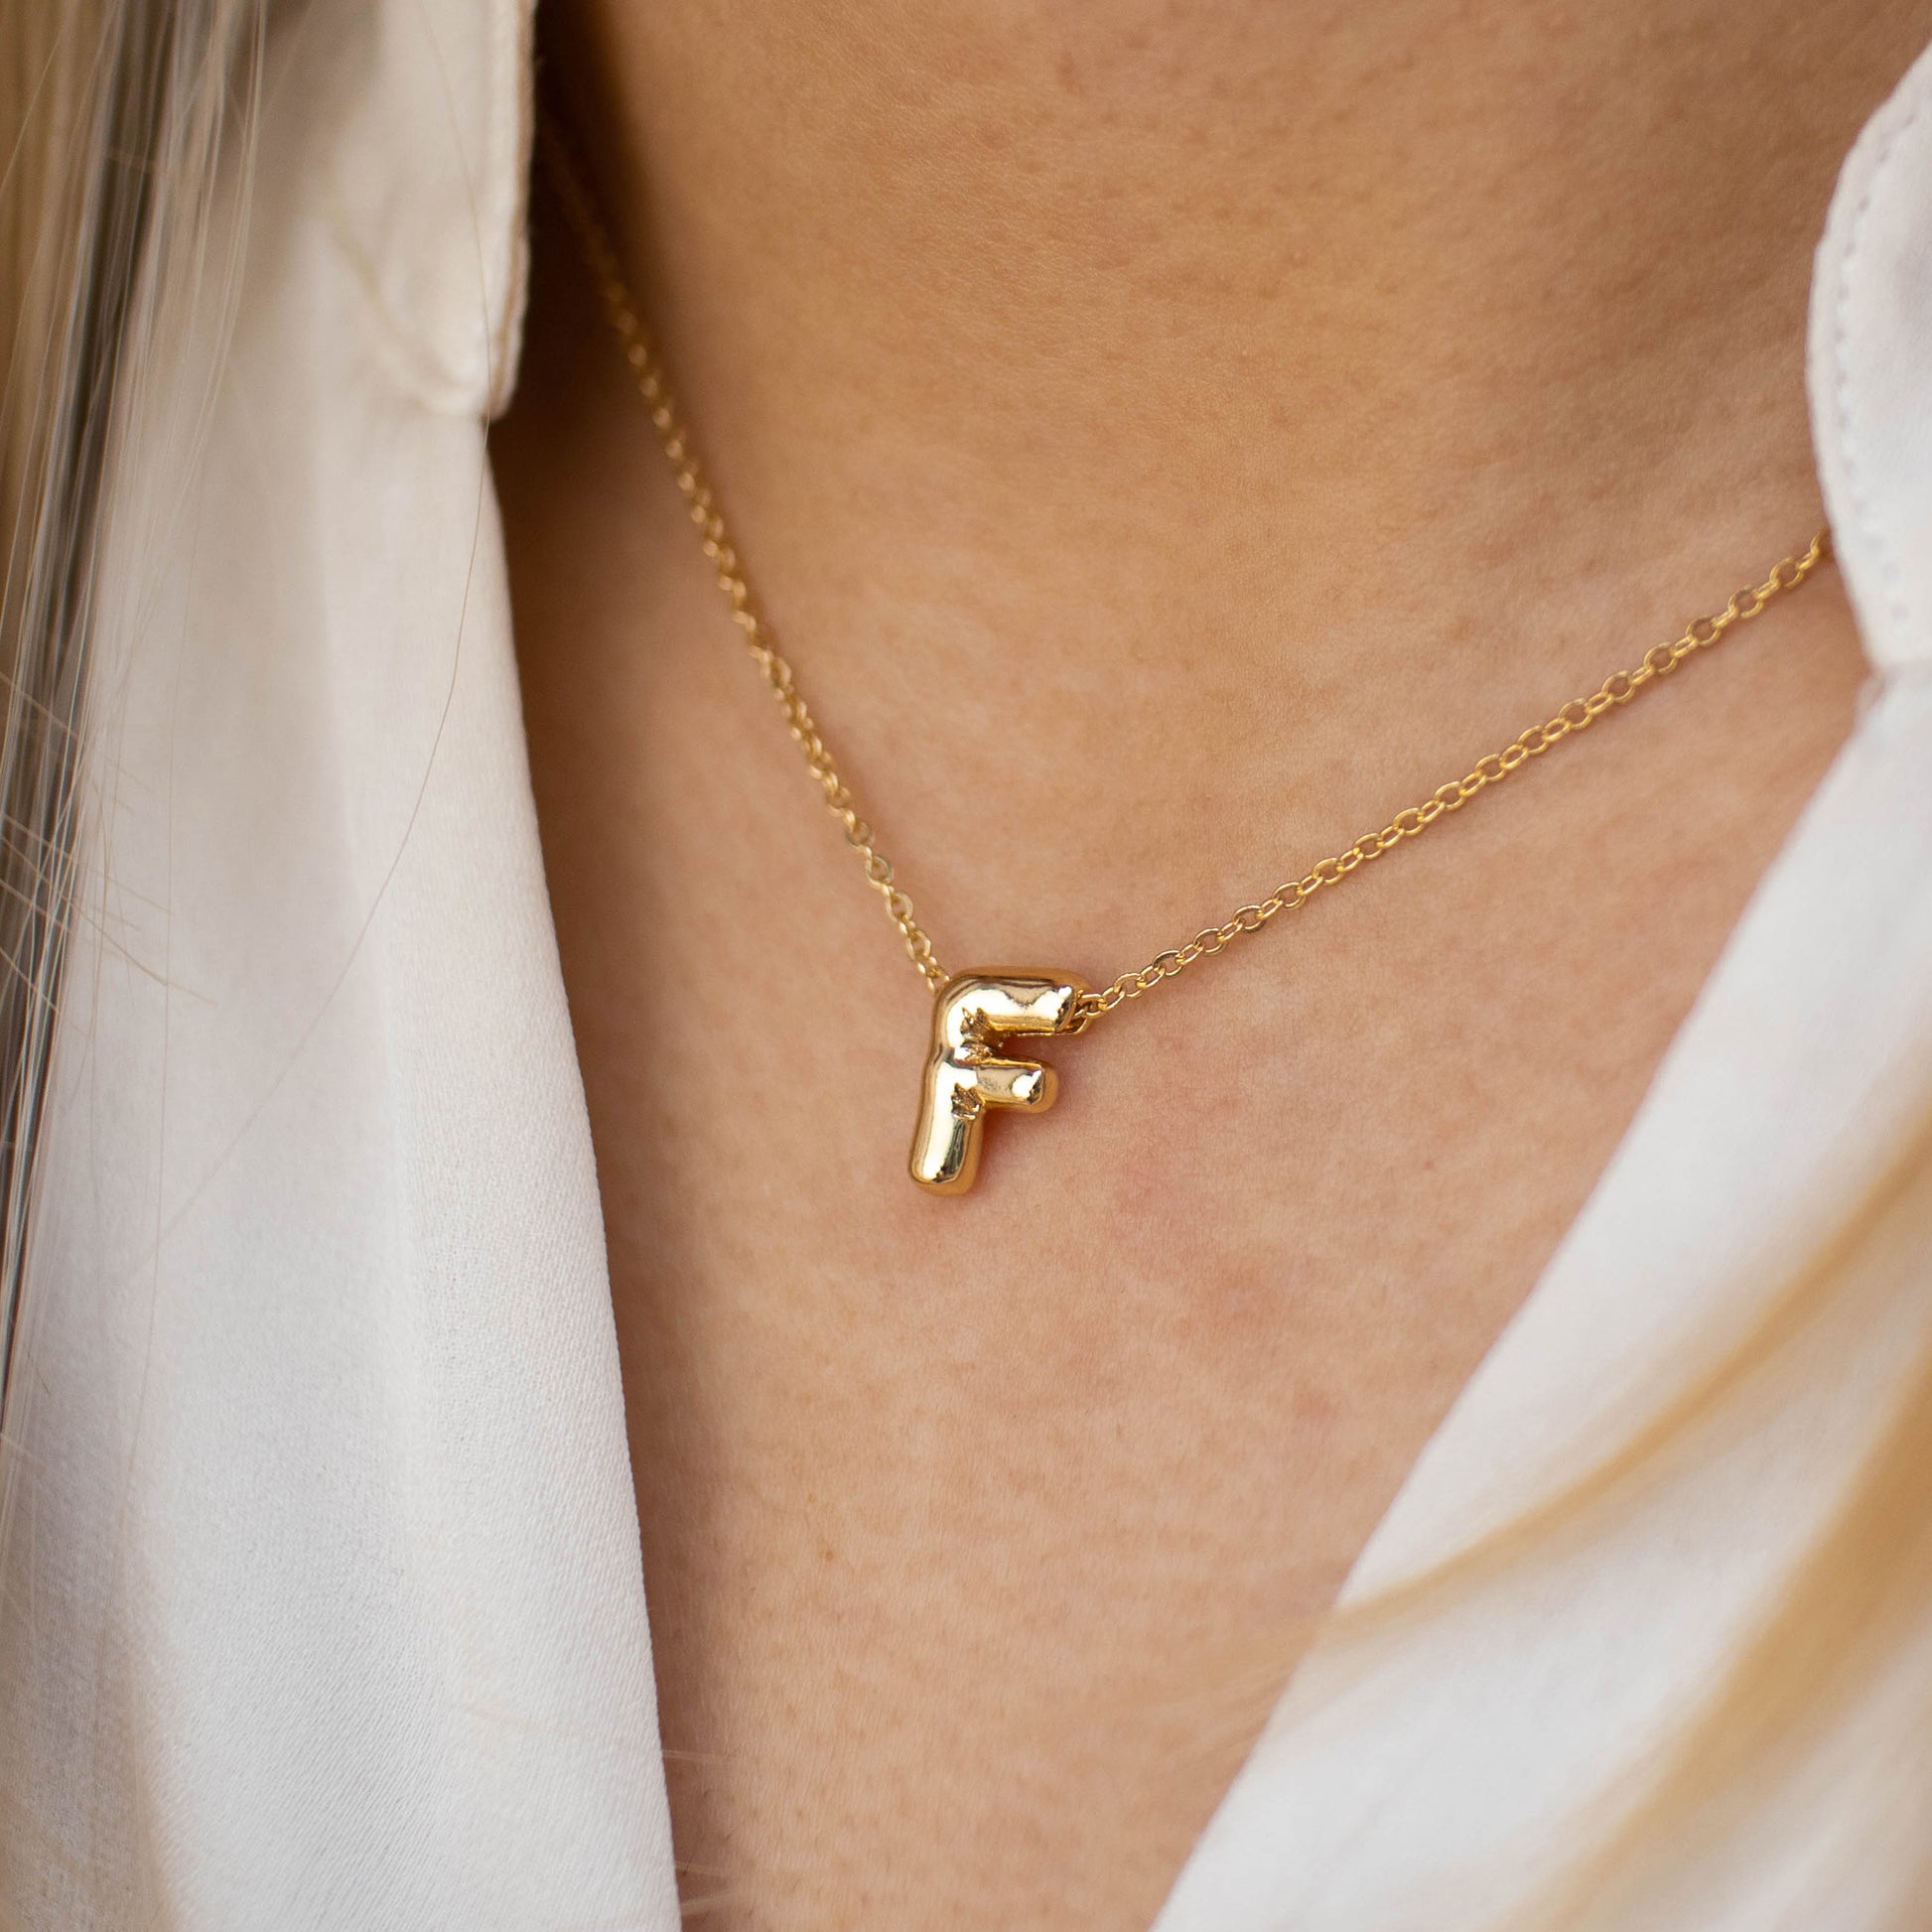 This photo features a thin chain necklace made of 14K gold-plated sterling silver, paired with a golden Bubble Letter pendant.